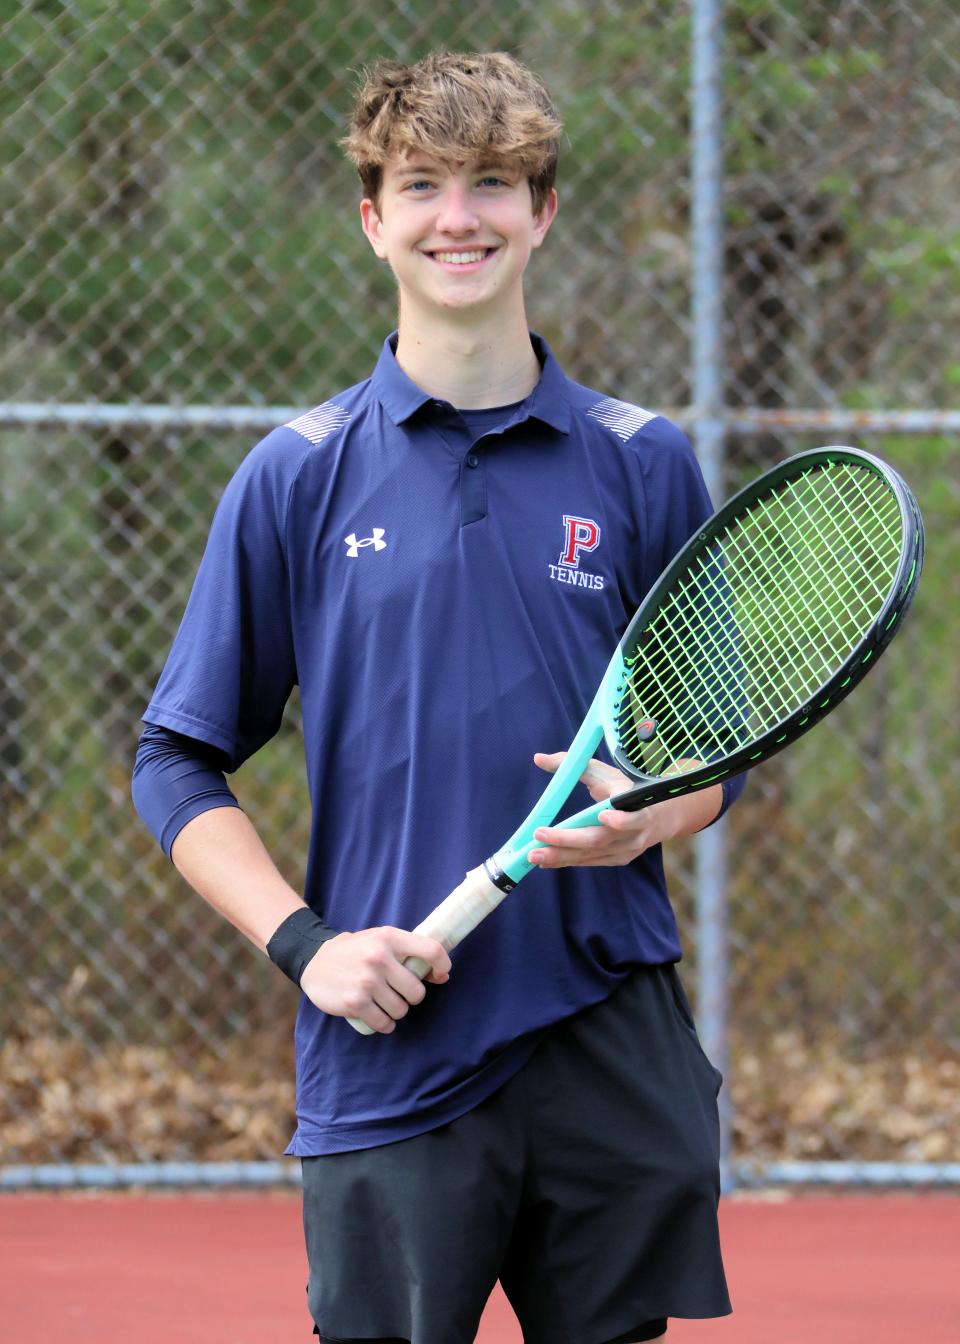 Evan Jacobson of Pembroke High has been named to The Patriot Ledger/Enterprise Boys Tennis All-Scholastic Team.